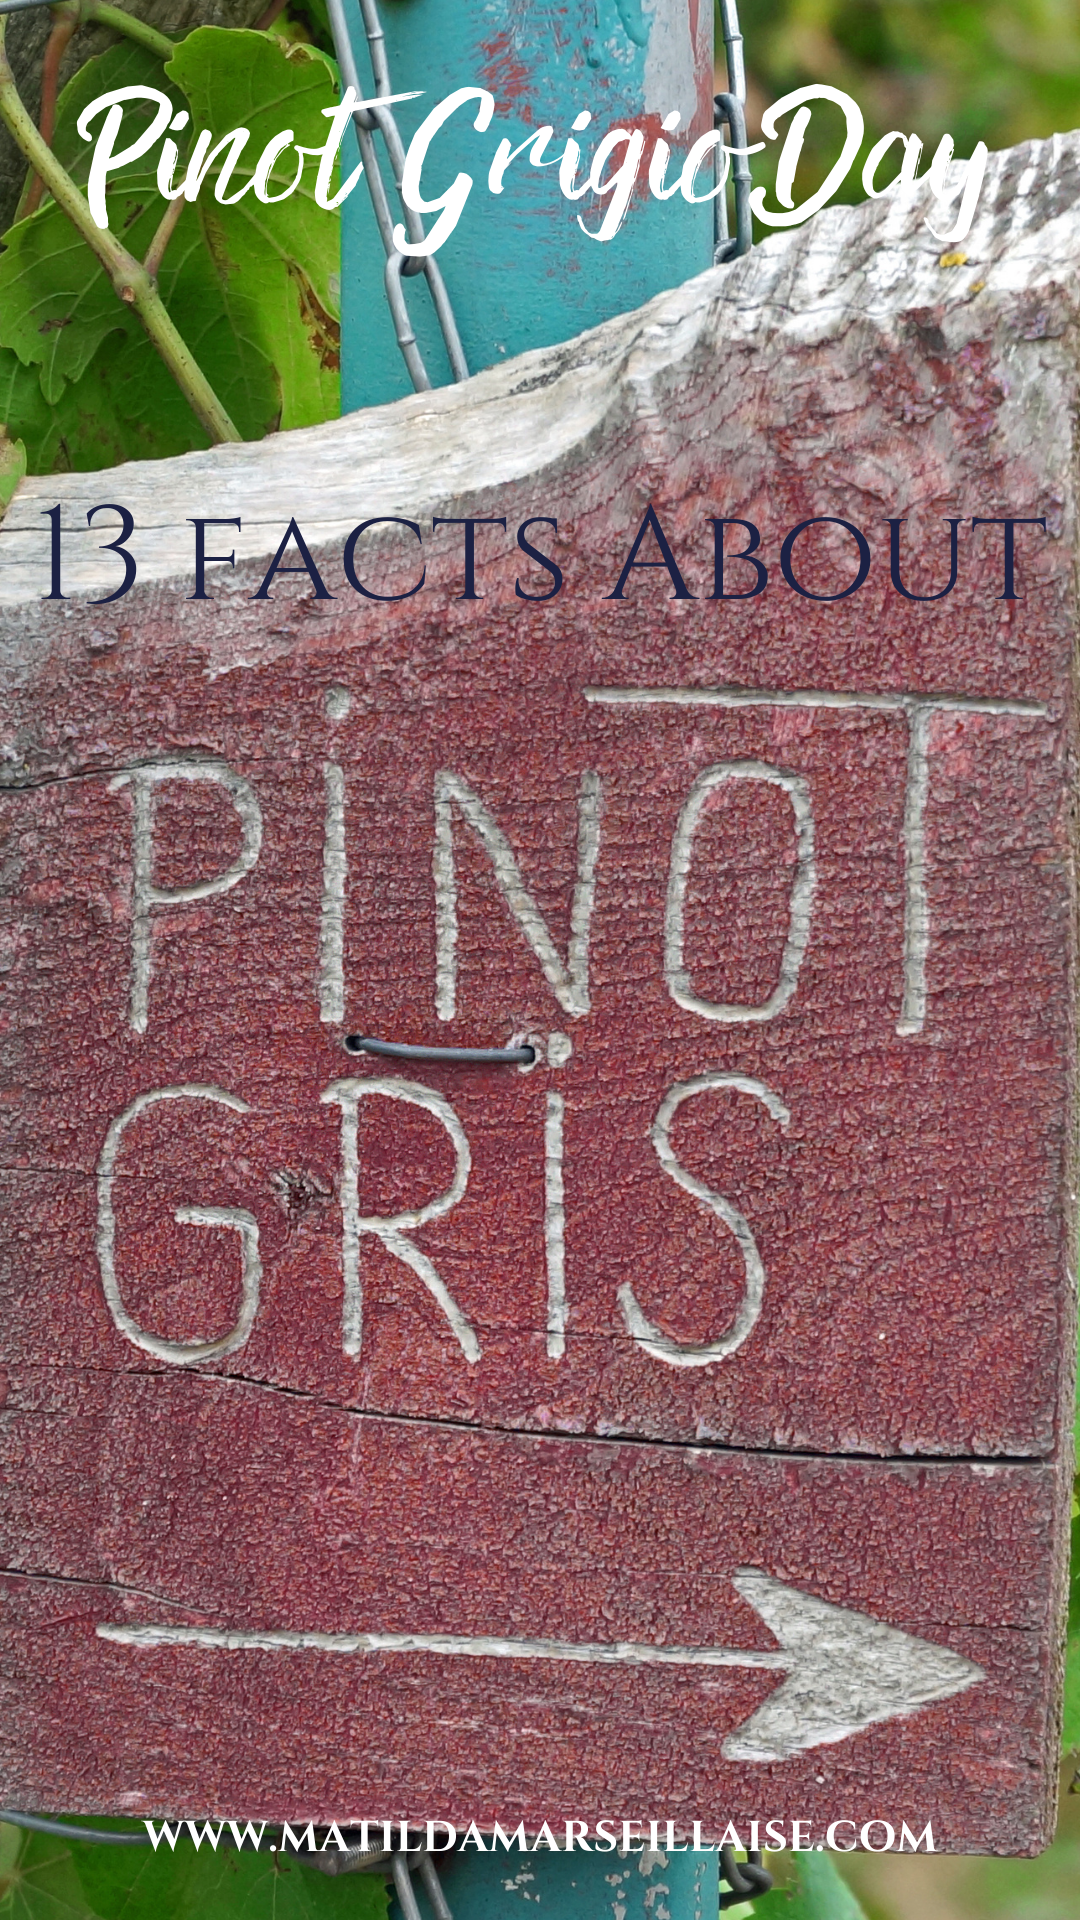 Pinot Grigio Day 2022: 13 Facts about Pinot Gris